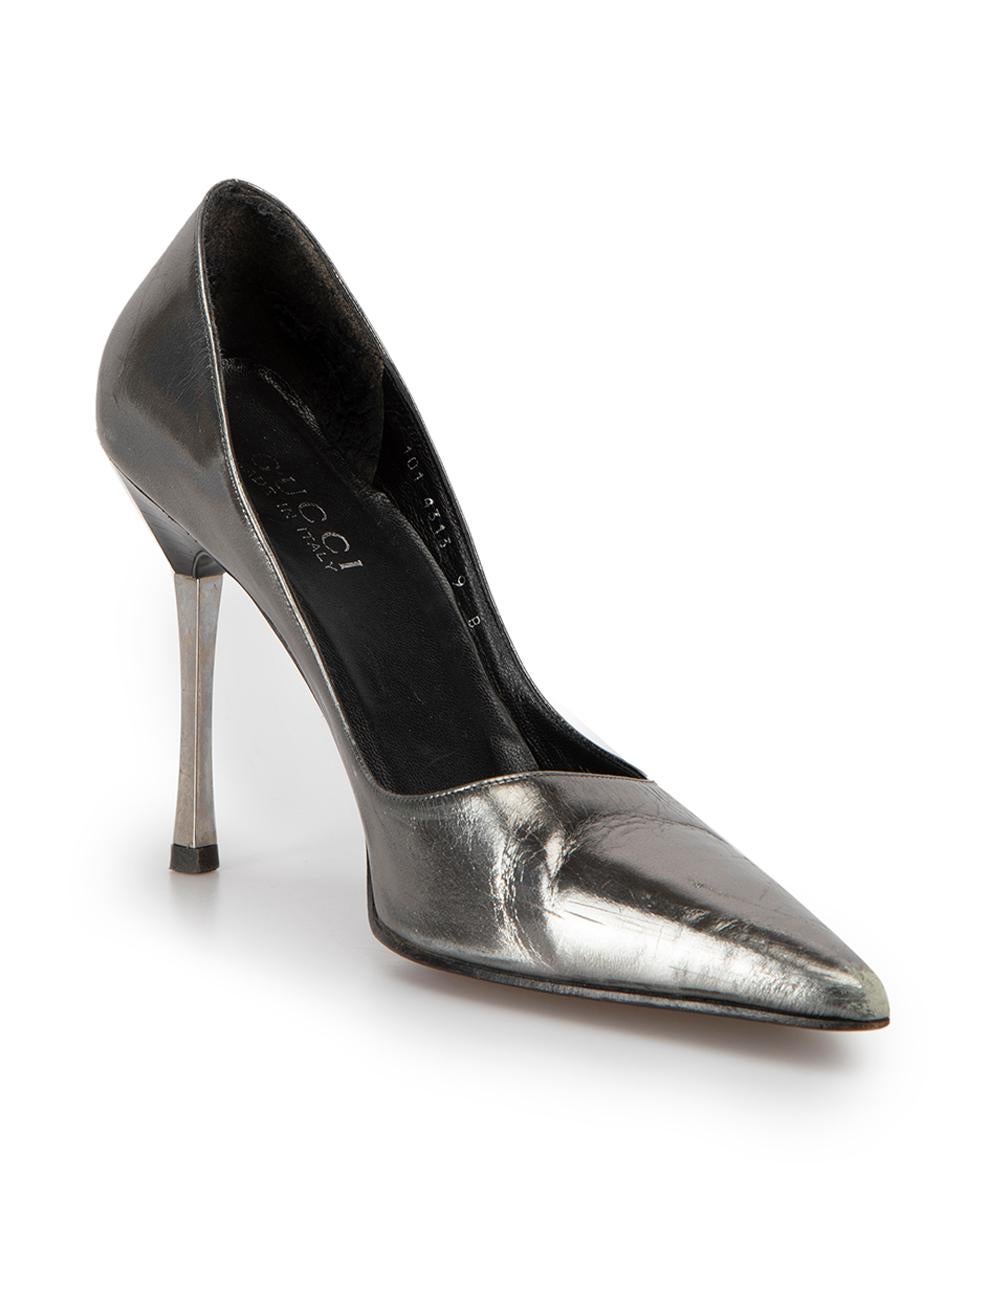 CONDITION is Good. General wear to shoes is evident. Moderate signs of wear to the exterior of leather, particularly at the toes on this used Gucci designer resale item.



Details


Silver

Patent leather

Pointed toe

Metal high heel

Insole